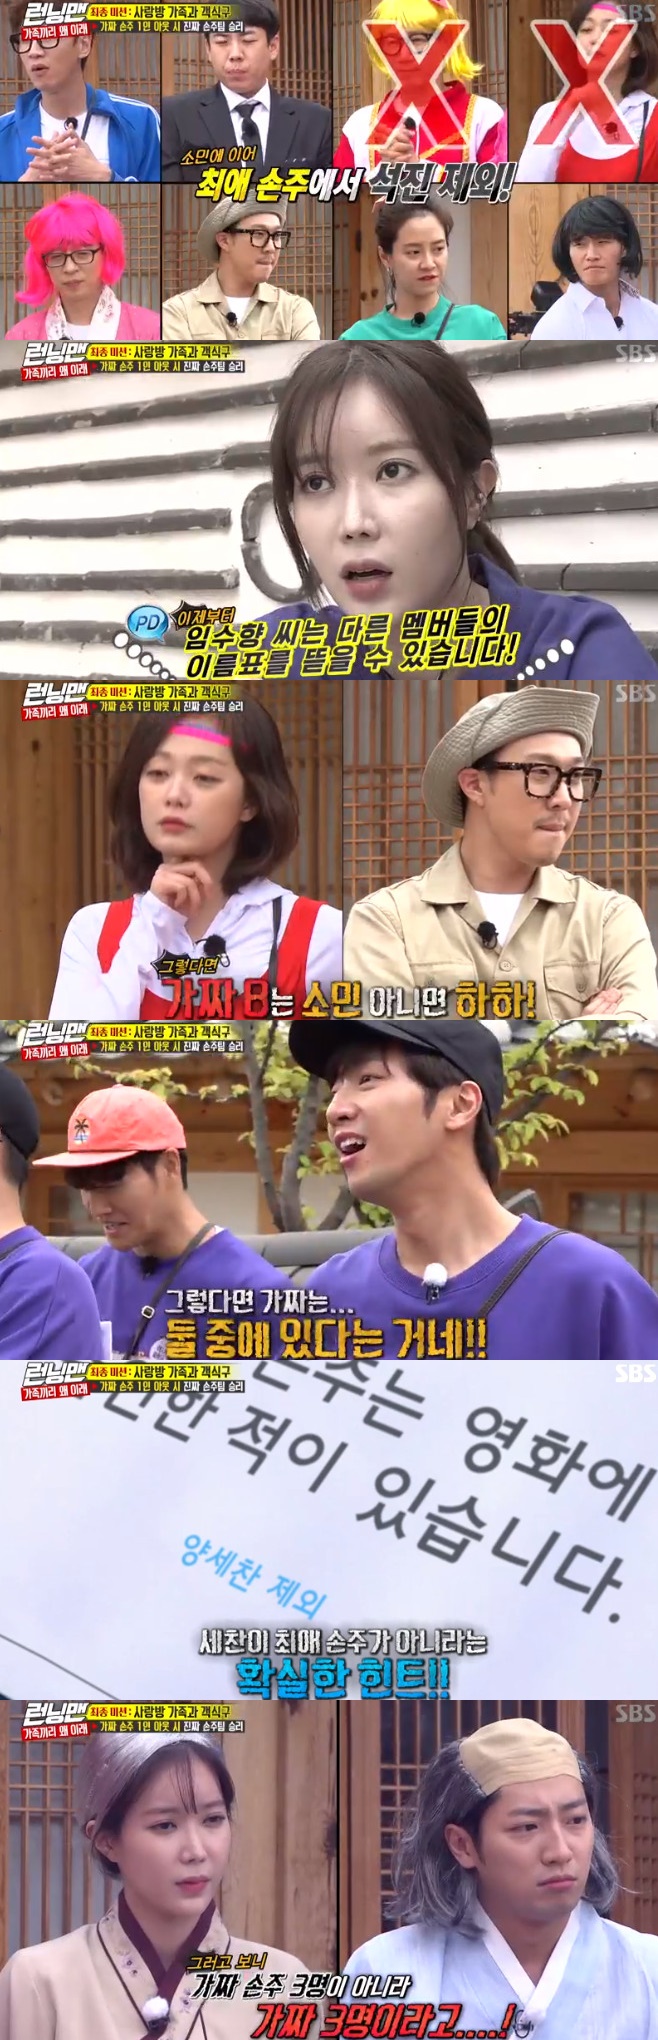 Running Man actor Lee Sang-yeob Im Soo-hyang has proved his creepy acting skills.In the SBS entertainment program Running Man broadcasted on the 26th, Running Man Family Lee Sang-yeob and Murder, She Wrote 8-1000 played a big role and Im Soo-hyang, who has a relationship with Yoo Jae-Suk, appeared.On this day, the members played a game on the theme of Why are the family together with the right to exempt couples from performing at the 9th anniversary fan meeting.Im Soo-hyang and Lee Sang-yeob turned into grandparents of Running Man members, drawing attention: wearing a white-haired wig and appearing as a rather shocking visual.Running Man members have transformed into characters such as long-term high school students, lawyers, mechanics, and keepers.Lee Sang-yeob announced the start of the game, revealing that three of his eight grandchildren were fake; the members hosted a game that required three of them to be identified.Grandmas Boy and Grandpa team, who entered Murder, She Wrote Game, showed various Game and attracted interest.Kim Jong Kook, Haha, Yoo Jae-Suk, Song Ji Hyo and grandfather team Yang Se-chan, Jeon So-min, Lee Kwang-soo and Ji Seok-jin, who belong to Grandmas Boy team, entered the kung-tung mission.After several attempts, Yoo Jae-Suk won and Grandmas Boy team got a hint.In the first hint, it was revealed that there were two men and one woman in the fake grandchildren, and the Murder, She Wrote, who were looking for fakes through various hints in the game, accelerated.In the final mission Sarangbang family and guesthouse, the outline of the fakes was revealed.The members were thrilled to find a fake grandchild, but soon Lee Kwang-soo was in a new phase as he discovered a decisive hint.Im Soo-hyang and Lee Sang-yeob, who claimed to be grandparents of the members before the game started, were caught.Throughout the game, they were not suspected of being fake, and they escaped Murder, She Wrote network, and they got more attention because they got the trust of the members.However, in the picture of the grandparents that Lee Kwang-soo found in Sarangbang, Im Soo-hyang and Lee Sang-yeob had other faces, which gave a reversal.In the meantime, the members were confused because they were firmly believed to be grandparents.The members did not listen carefully to the crew to find Fake 3 because they were worried about the fake grandchildren.Lee Sang-yeob and Im Soo-hyang also did not care that they could be nominated for fake.However, Im Soo-hyang and Lee Sang-yeob were found to be fake, ripping off the name tag with hints from Lee Kwang-soo.Lee Kwang-soo then pointed to the fake grandson Haha, and the real grandchildren won the championship.Im Soo-hyang, Lee Sang-yeob and Haha were baptized, but they were impressed by the members who made a reversal of the past.Im Soo-hyang added the fun of the reversal when he first met them, saying, My grandchildren are five.Meanwhile, Haha and the couple who will perform the couple were selected through a lottery, and Yoo Jae-Suk won and caused laughter.